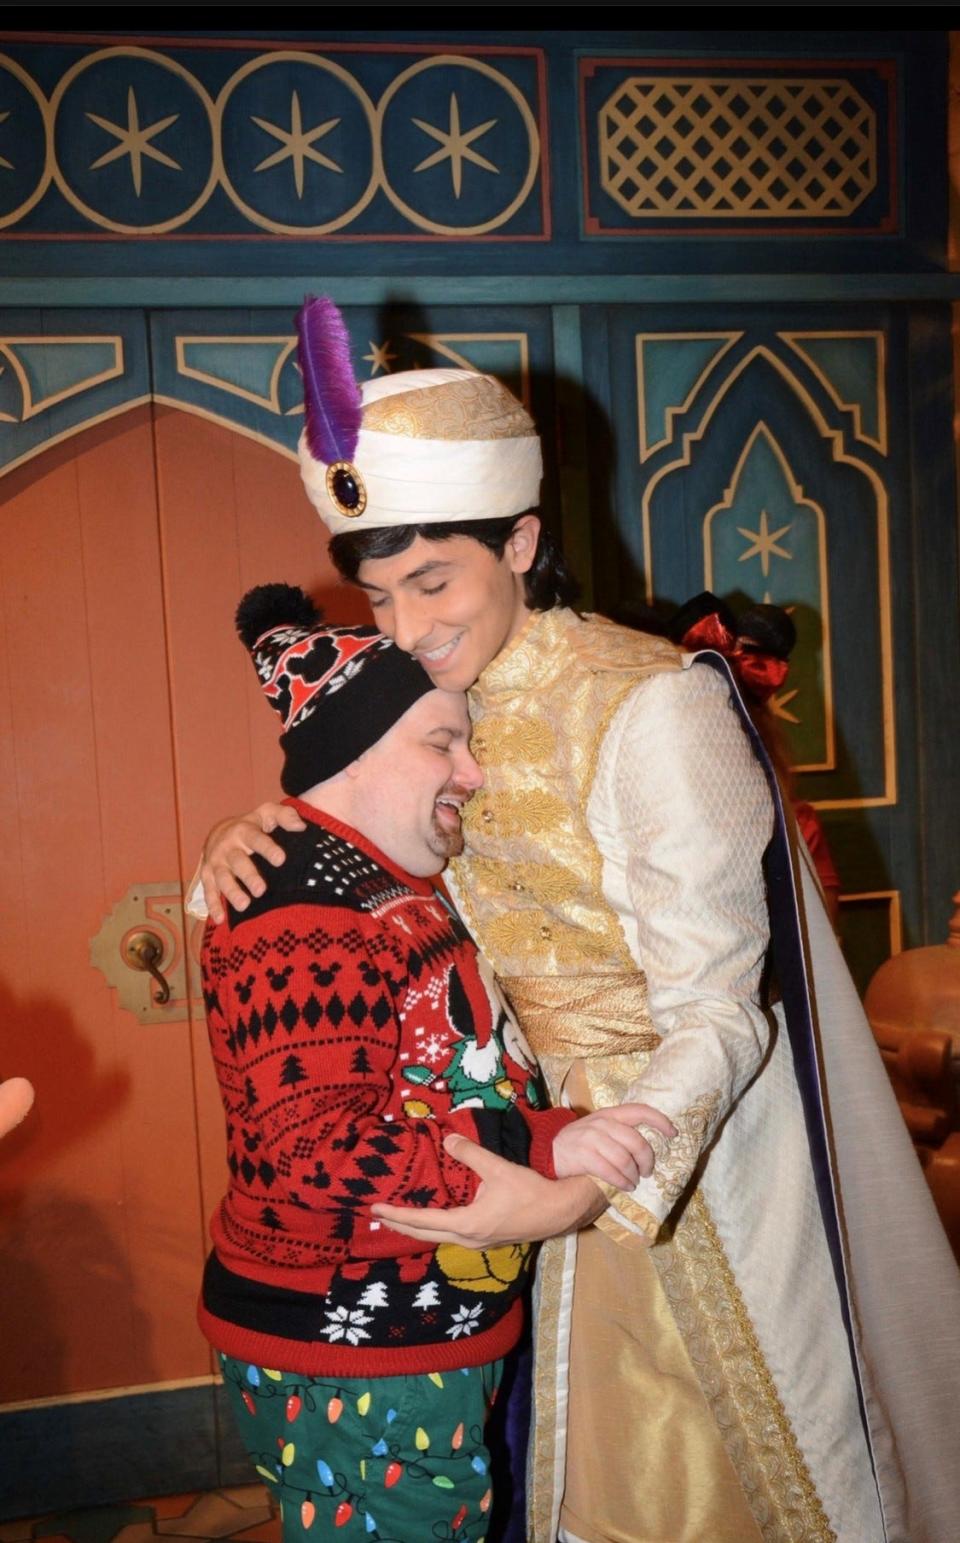 Patrick Hindermyer, left, who has severe and profound disabilities, gets a hug from Aladdin during a pre-pandemic visit to Walt Disney World.